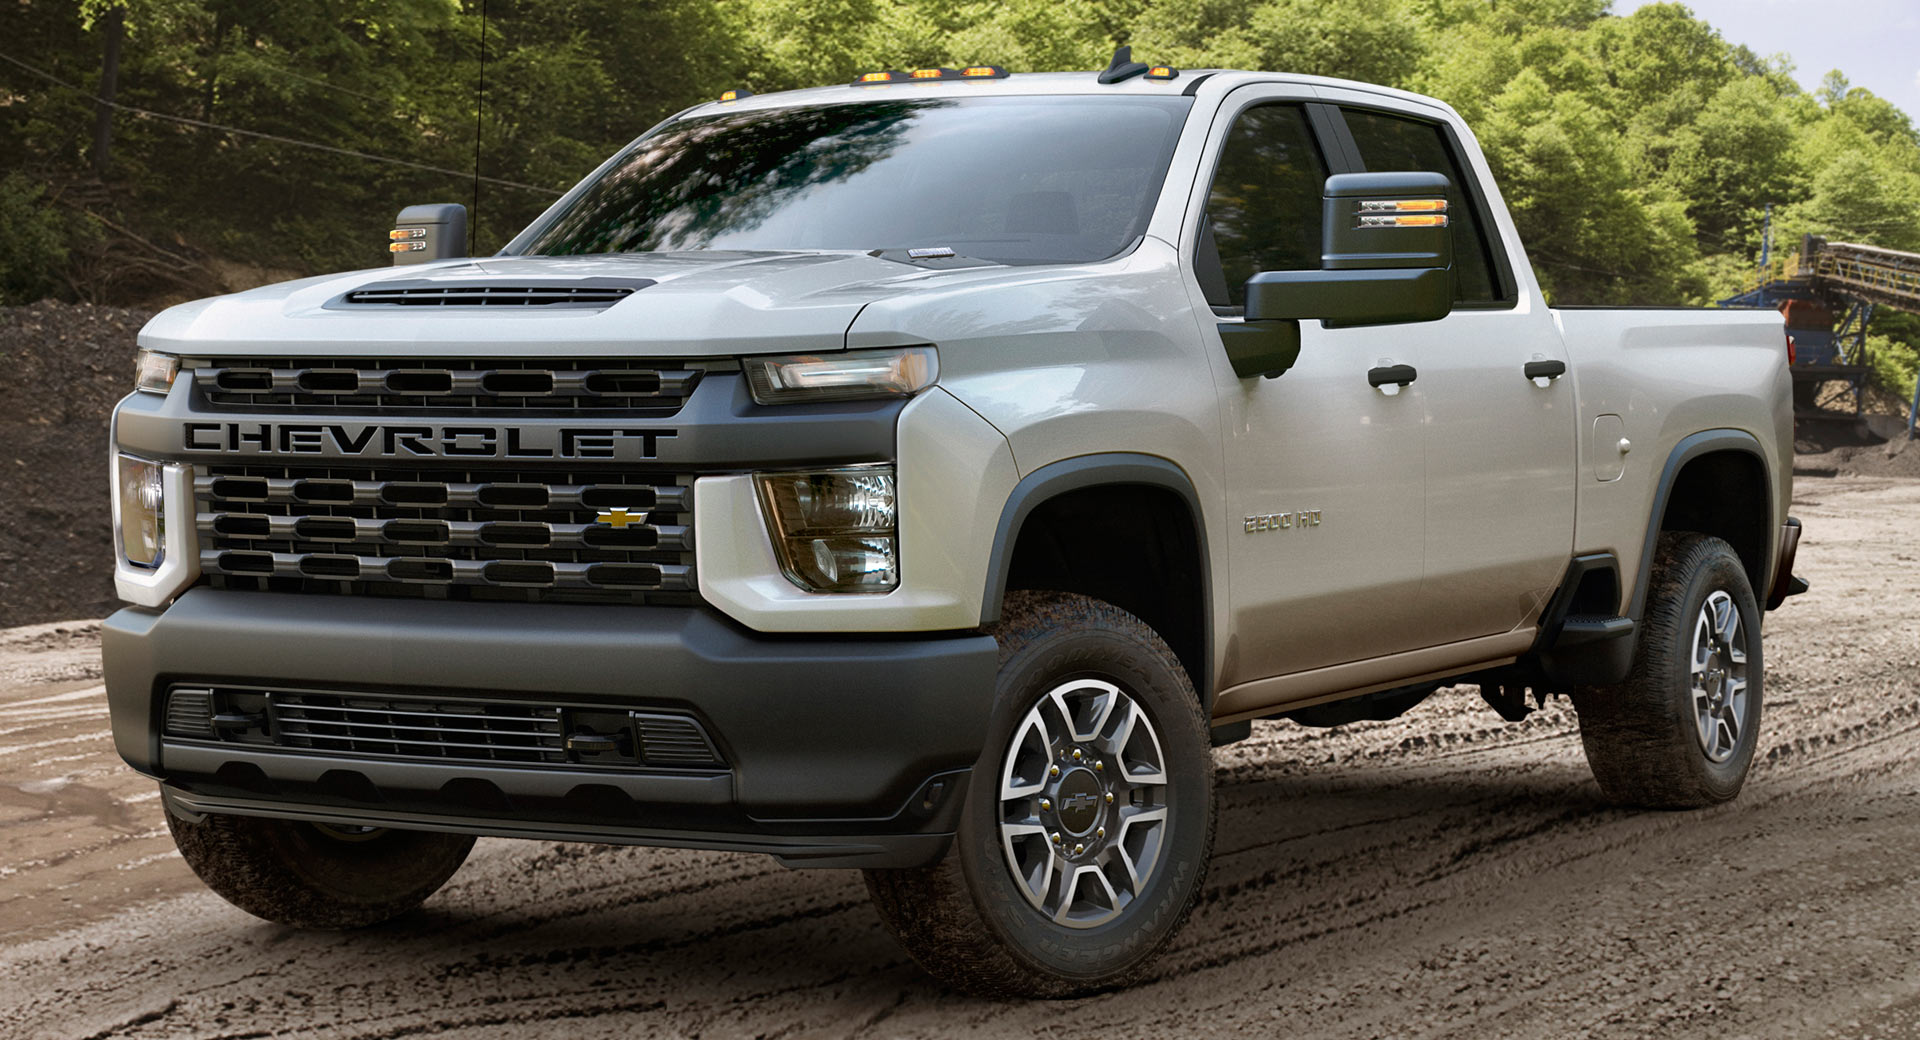 2020 Chevrolet Silverado HD Debuts With New 6.6-liter V8 And 35,500